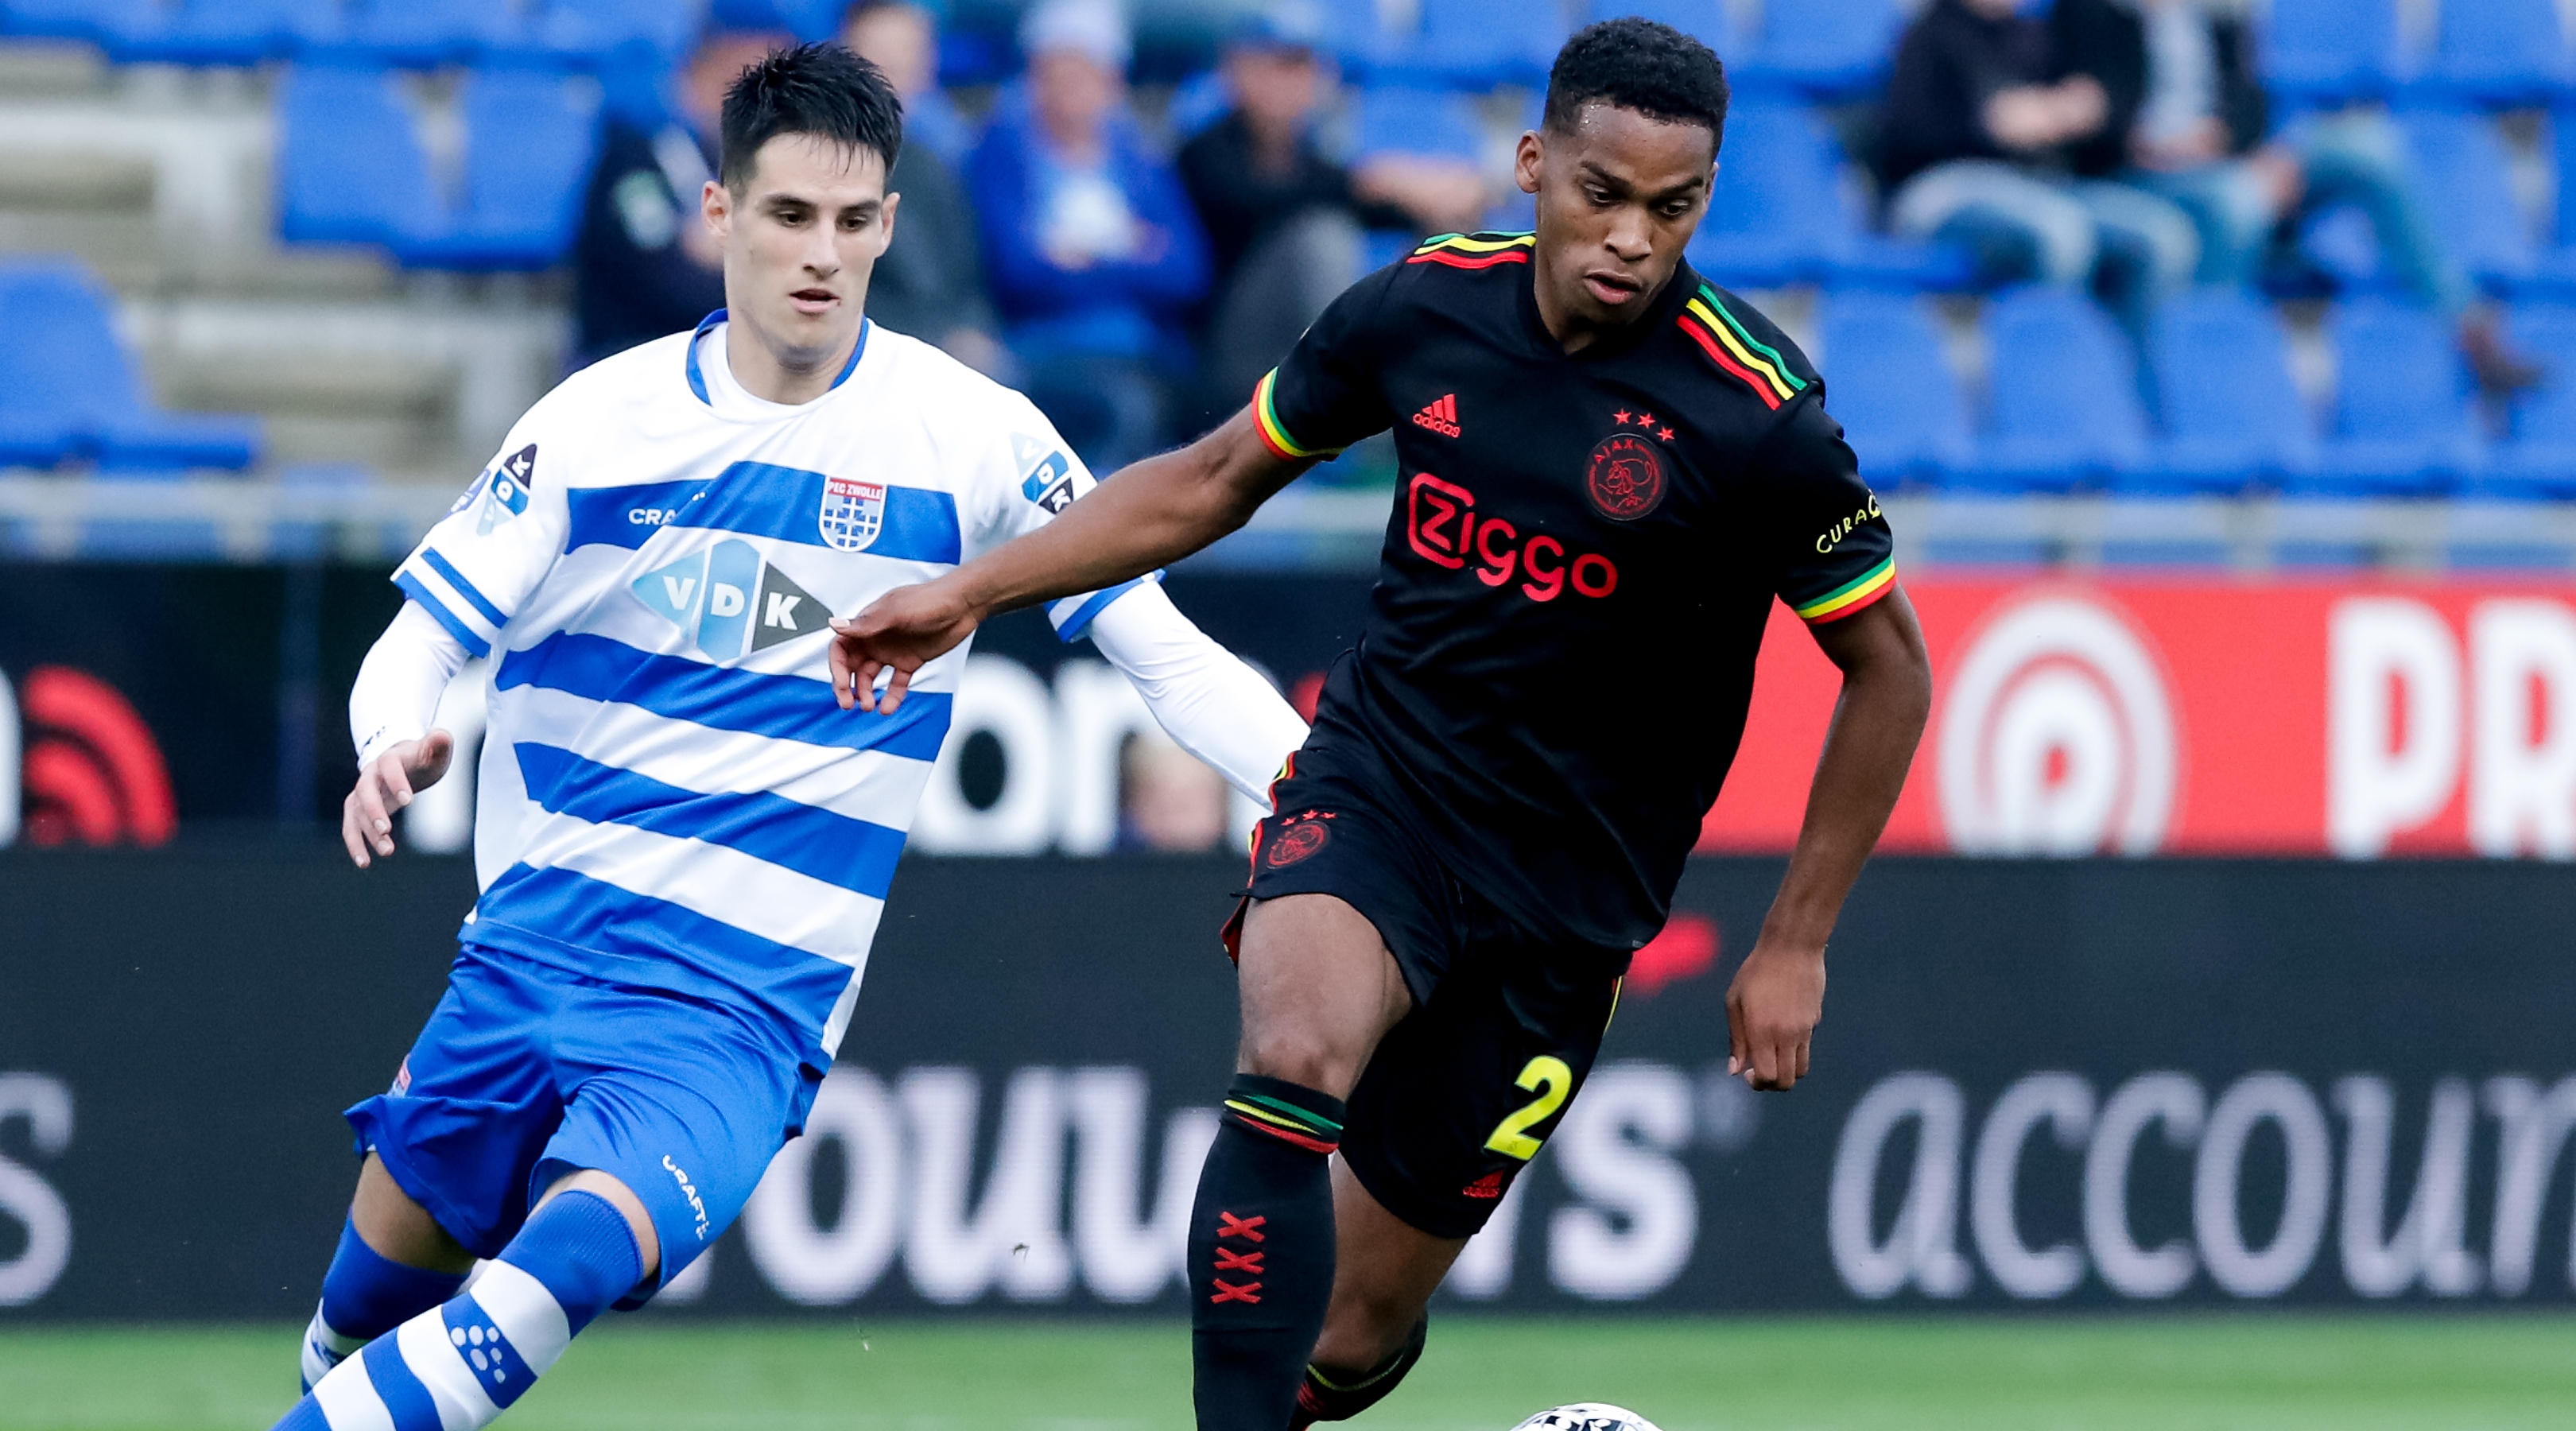 Slobodan Tedic of PEC Zwolle and Jurrien Timber of Ajax during the Dutch Eredivisie match between PEC Zwolle and Ajax at MAC³PARK Stadion on September 11, 2021 in Zwolle, Netherlands (Photo by Peter Lous/BSR Agency/Getty Images)